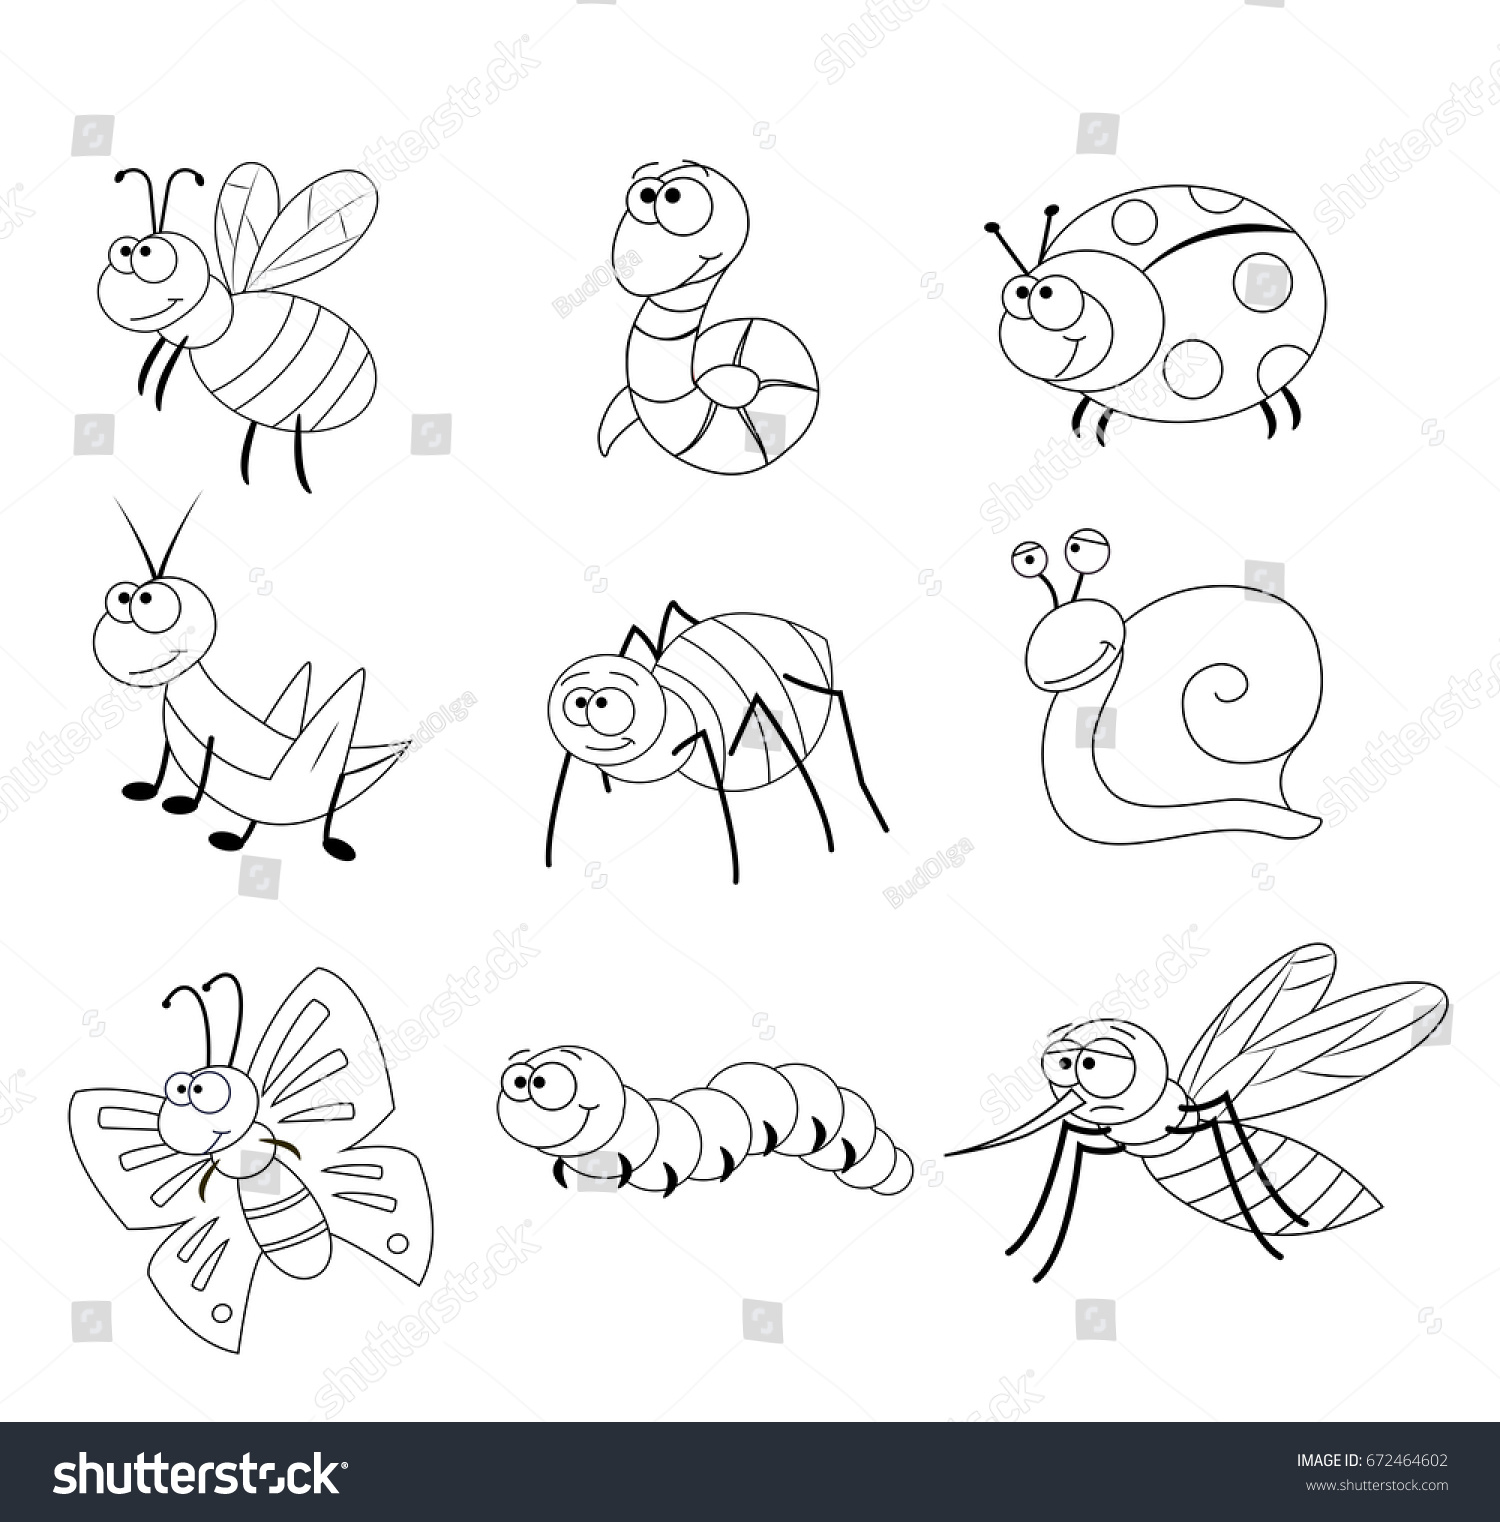 Coloring page for preschool children Set of different cartoon insects Funny insects Vector